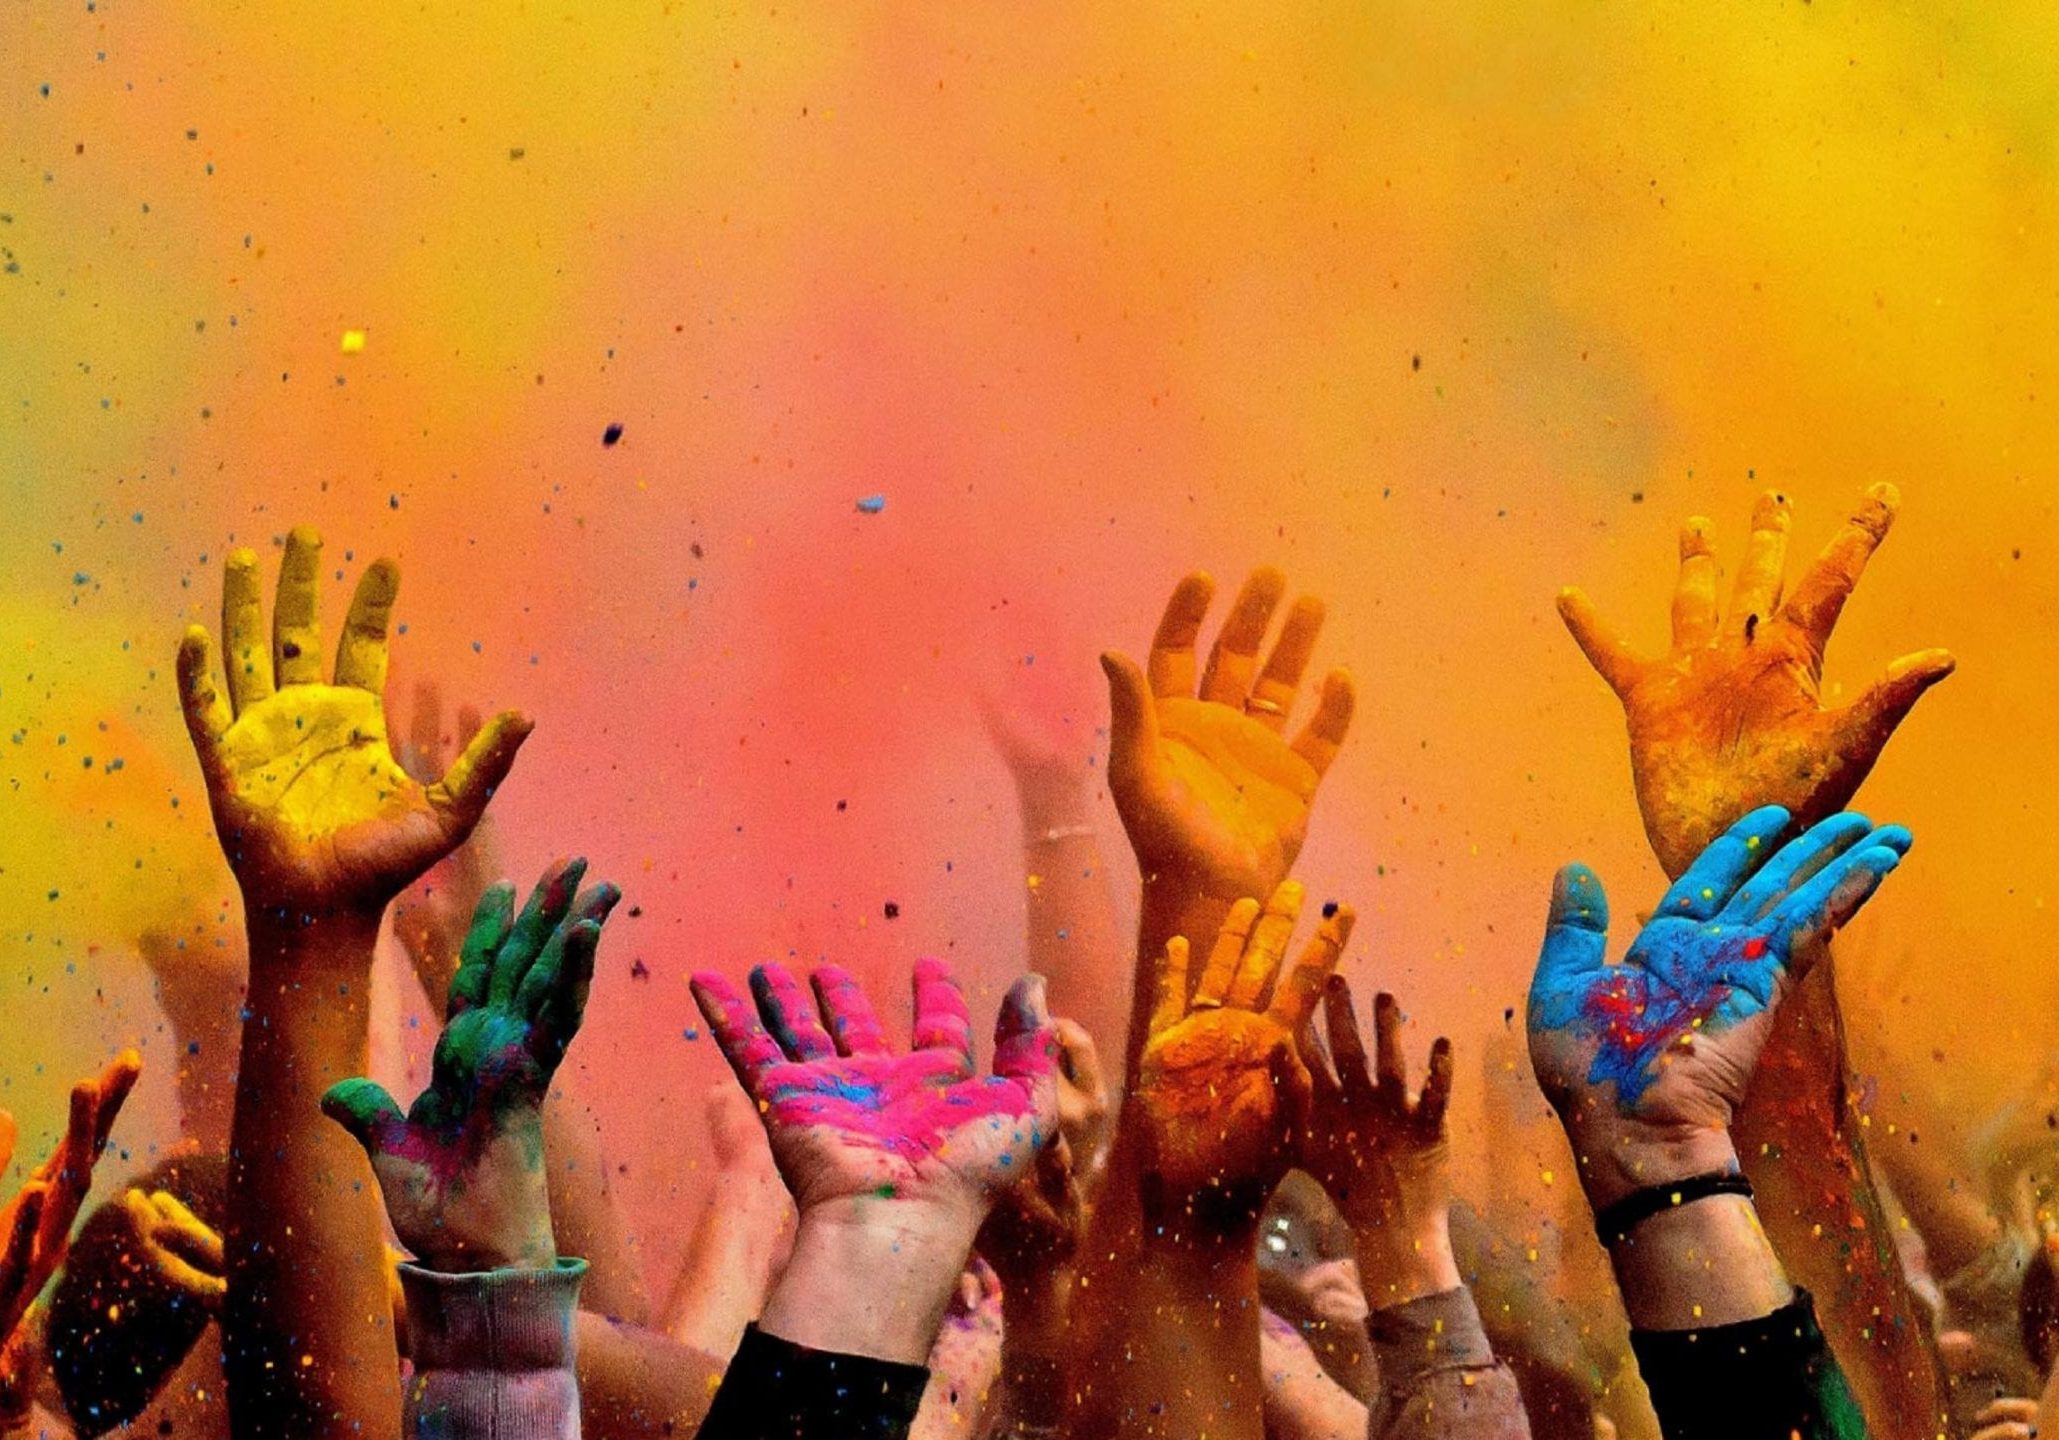 A biggest festival holi celebration in India in the month of march